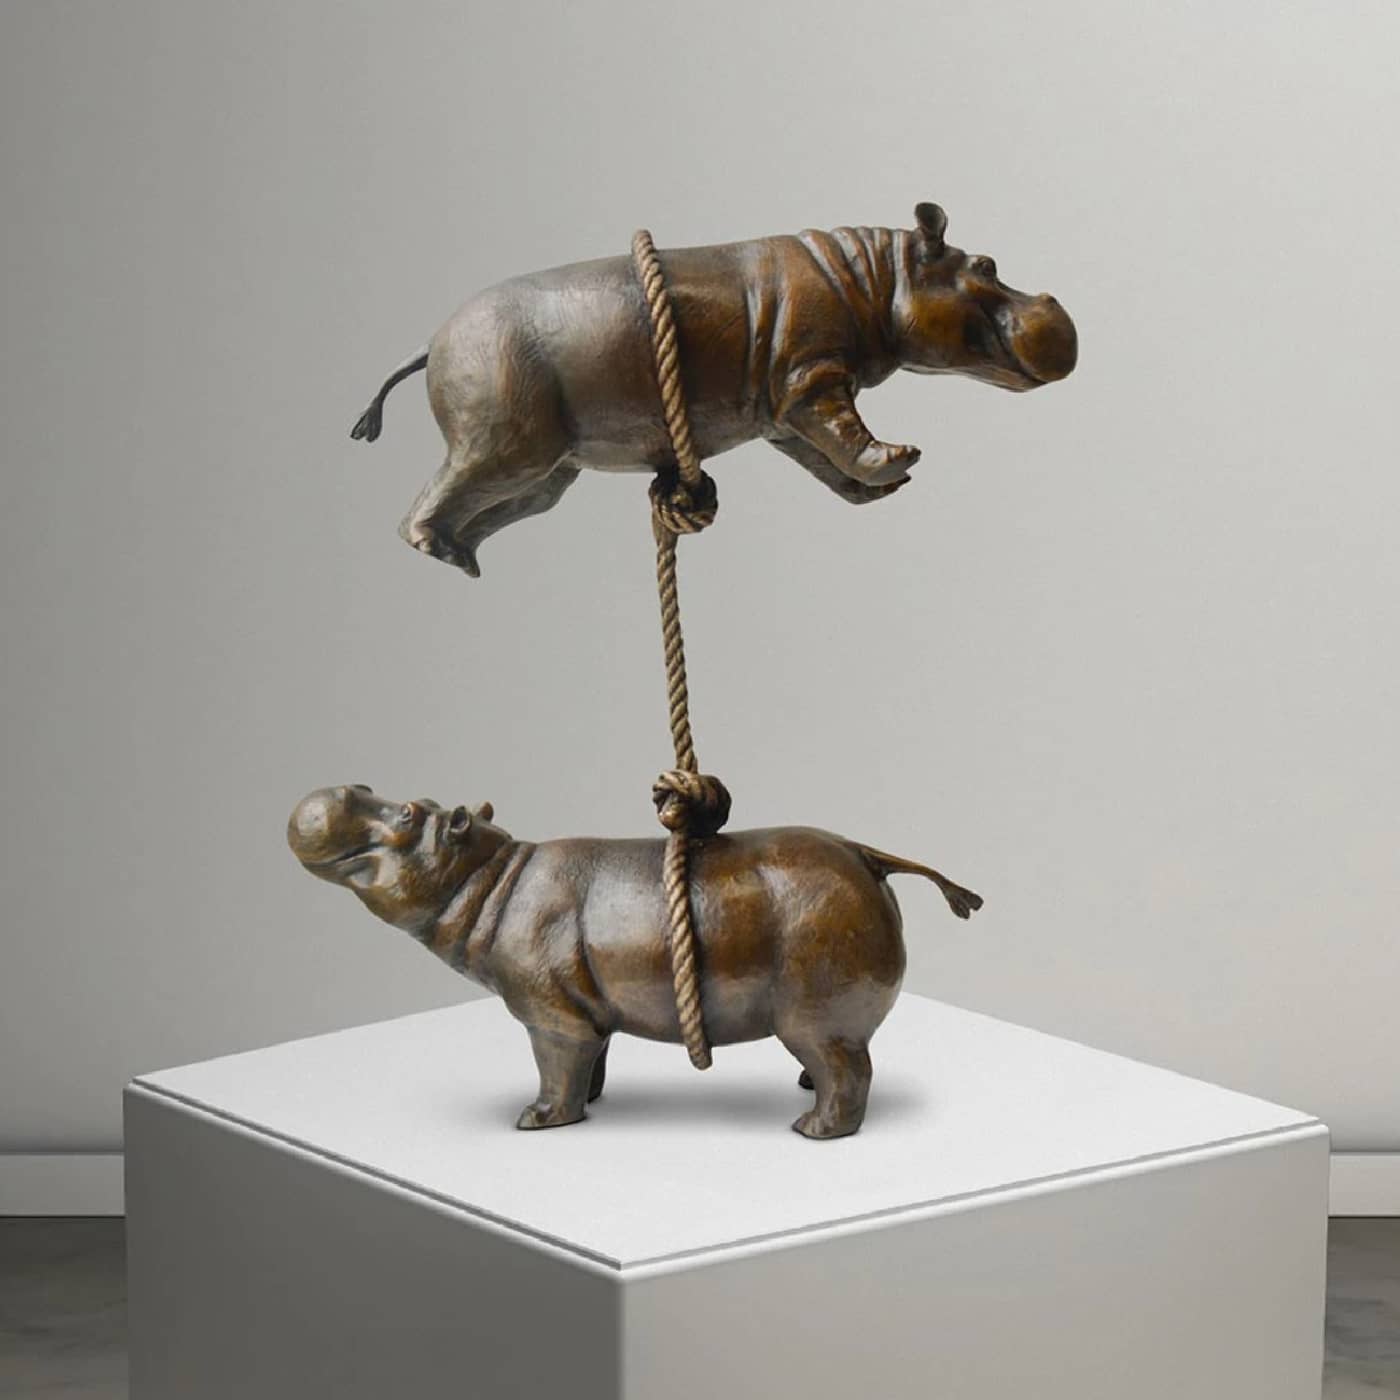 Gillie and Marc Bronze Sculpture ~ 'Hippos Support Each Other' - Curate Art & Design Gallery Sorrento Mornington Peninsula Melbourne